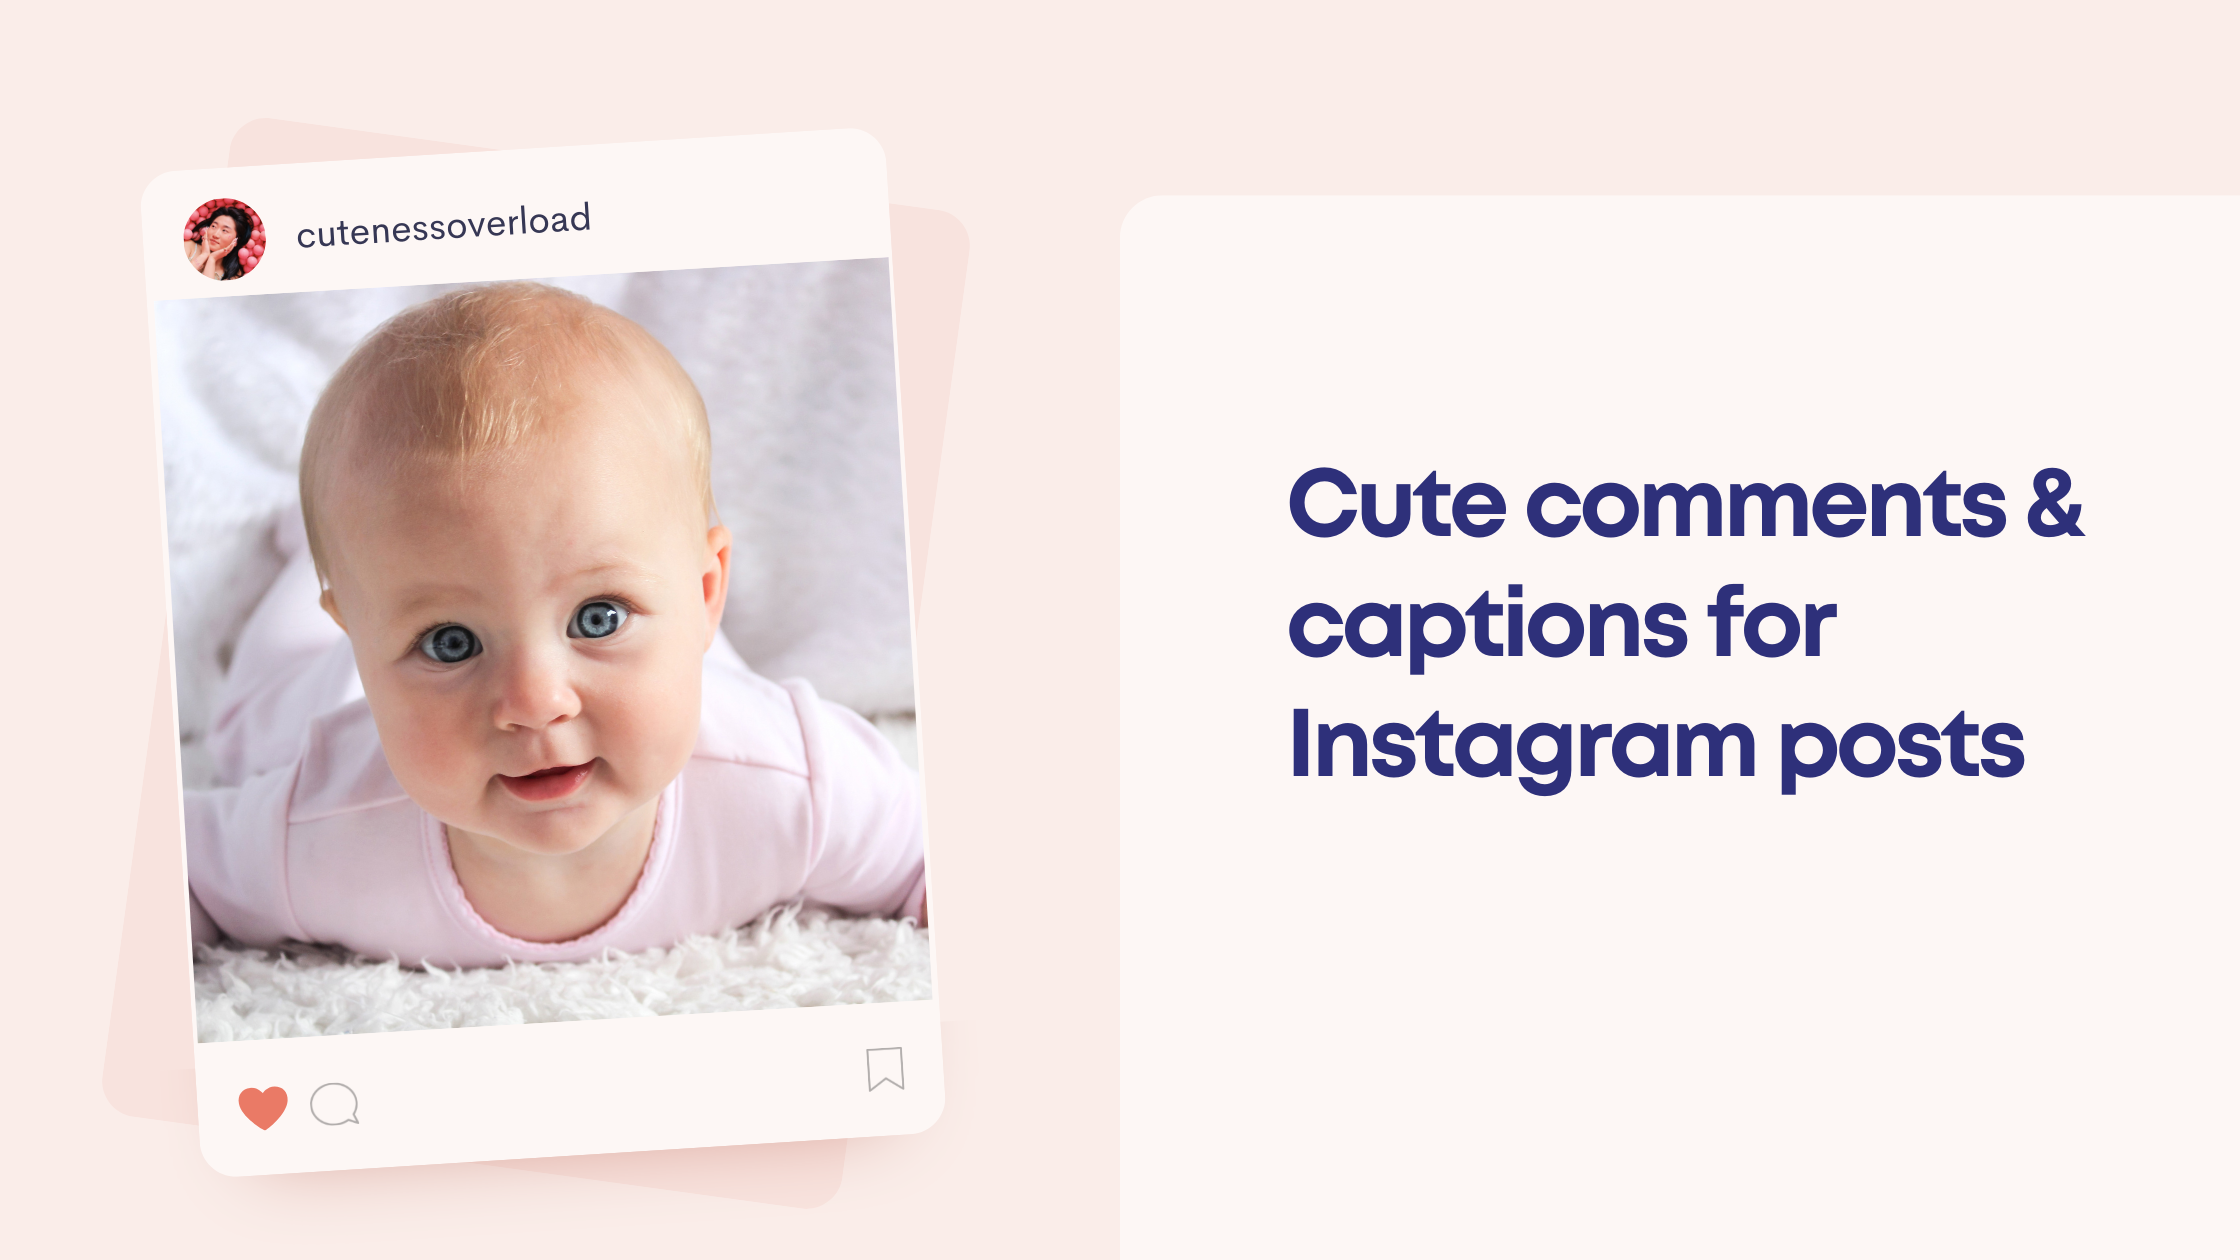 Remote.tools shares a list of cute comments & captions for Instagram posts